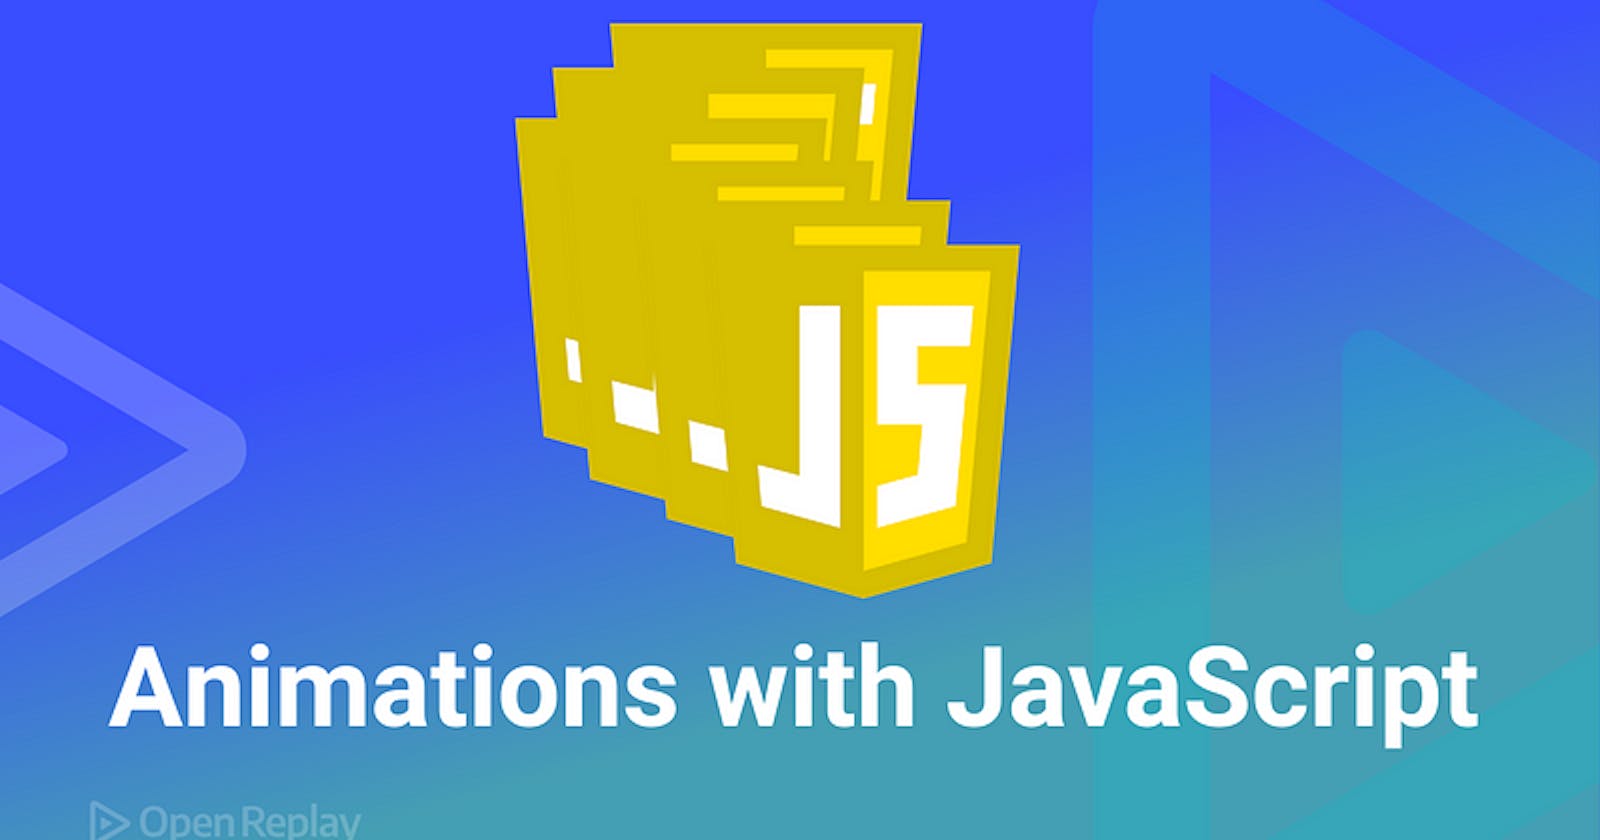 What’s the best way to do animations with JavaScript?